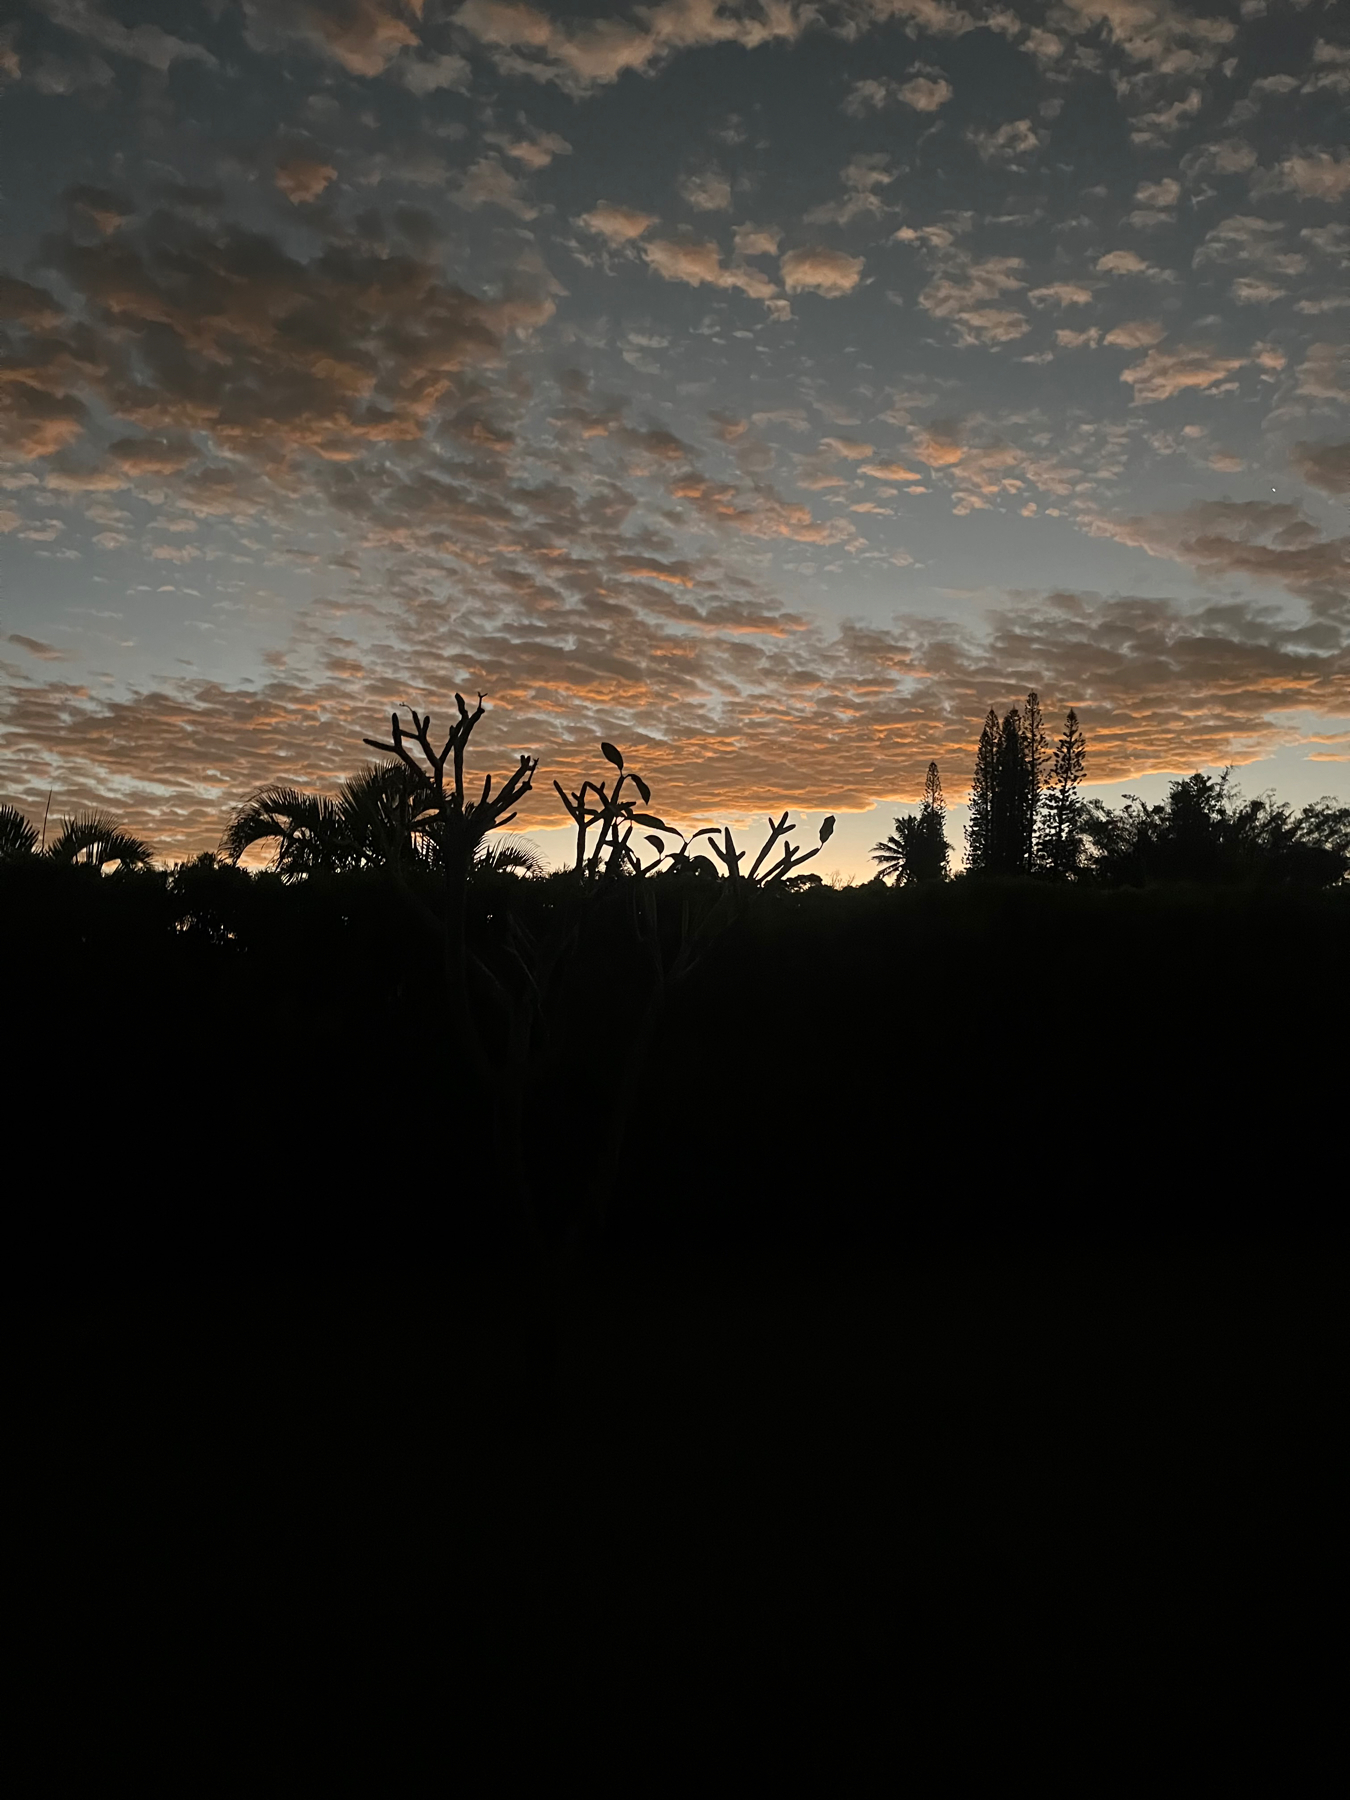 The sky at dawn, just before sunrise with scattered clouds in shades of orange and gray above a dark silhouette of trees and shrubs.